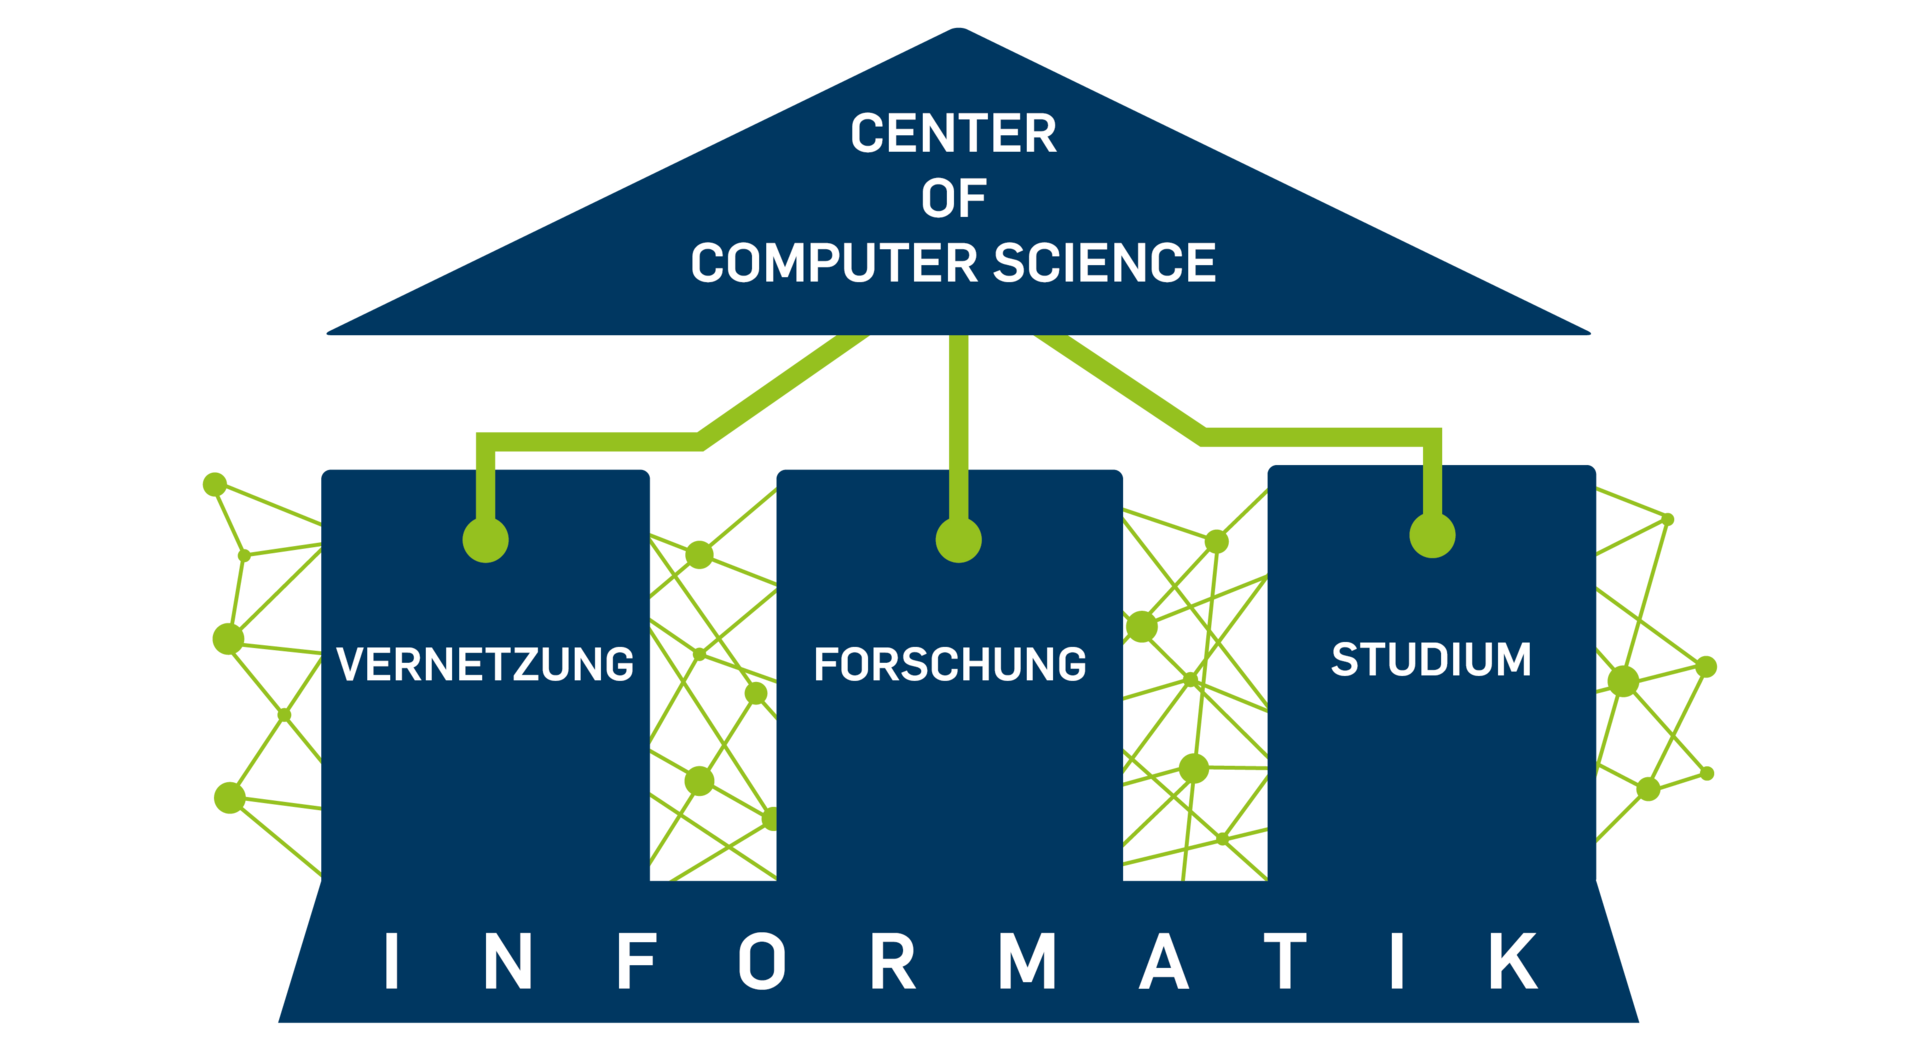 The 3 pillars of the Center Of Computer Science